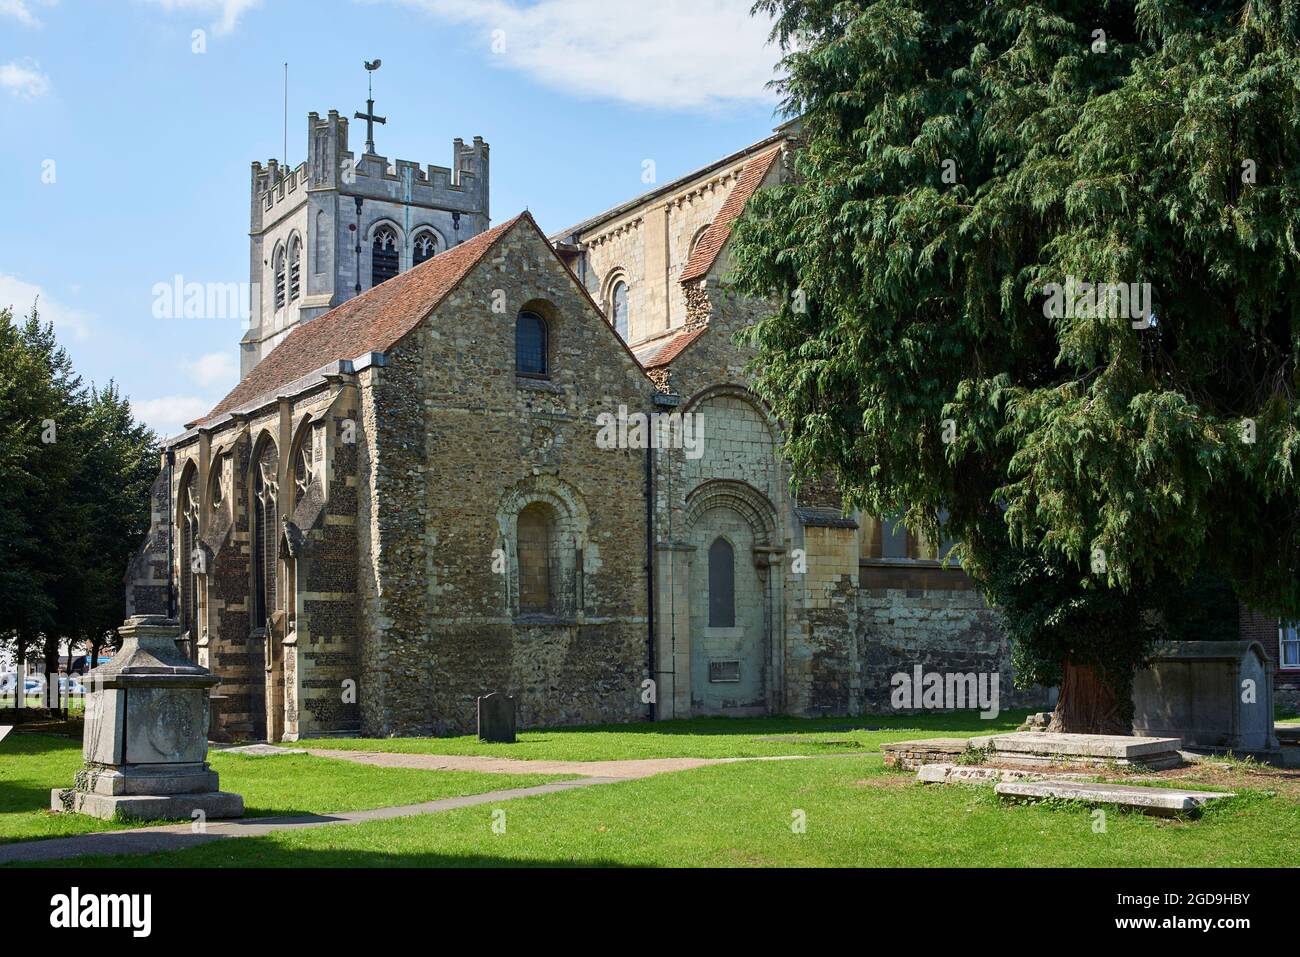 The historic exterior of Waltham Abbey church, Essex, Southern England Stock Photo